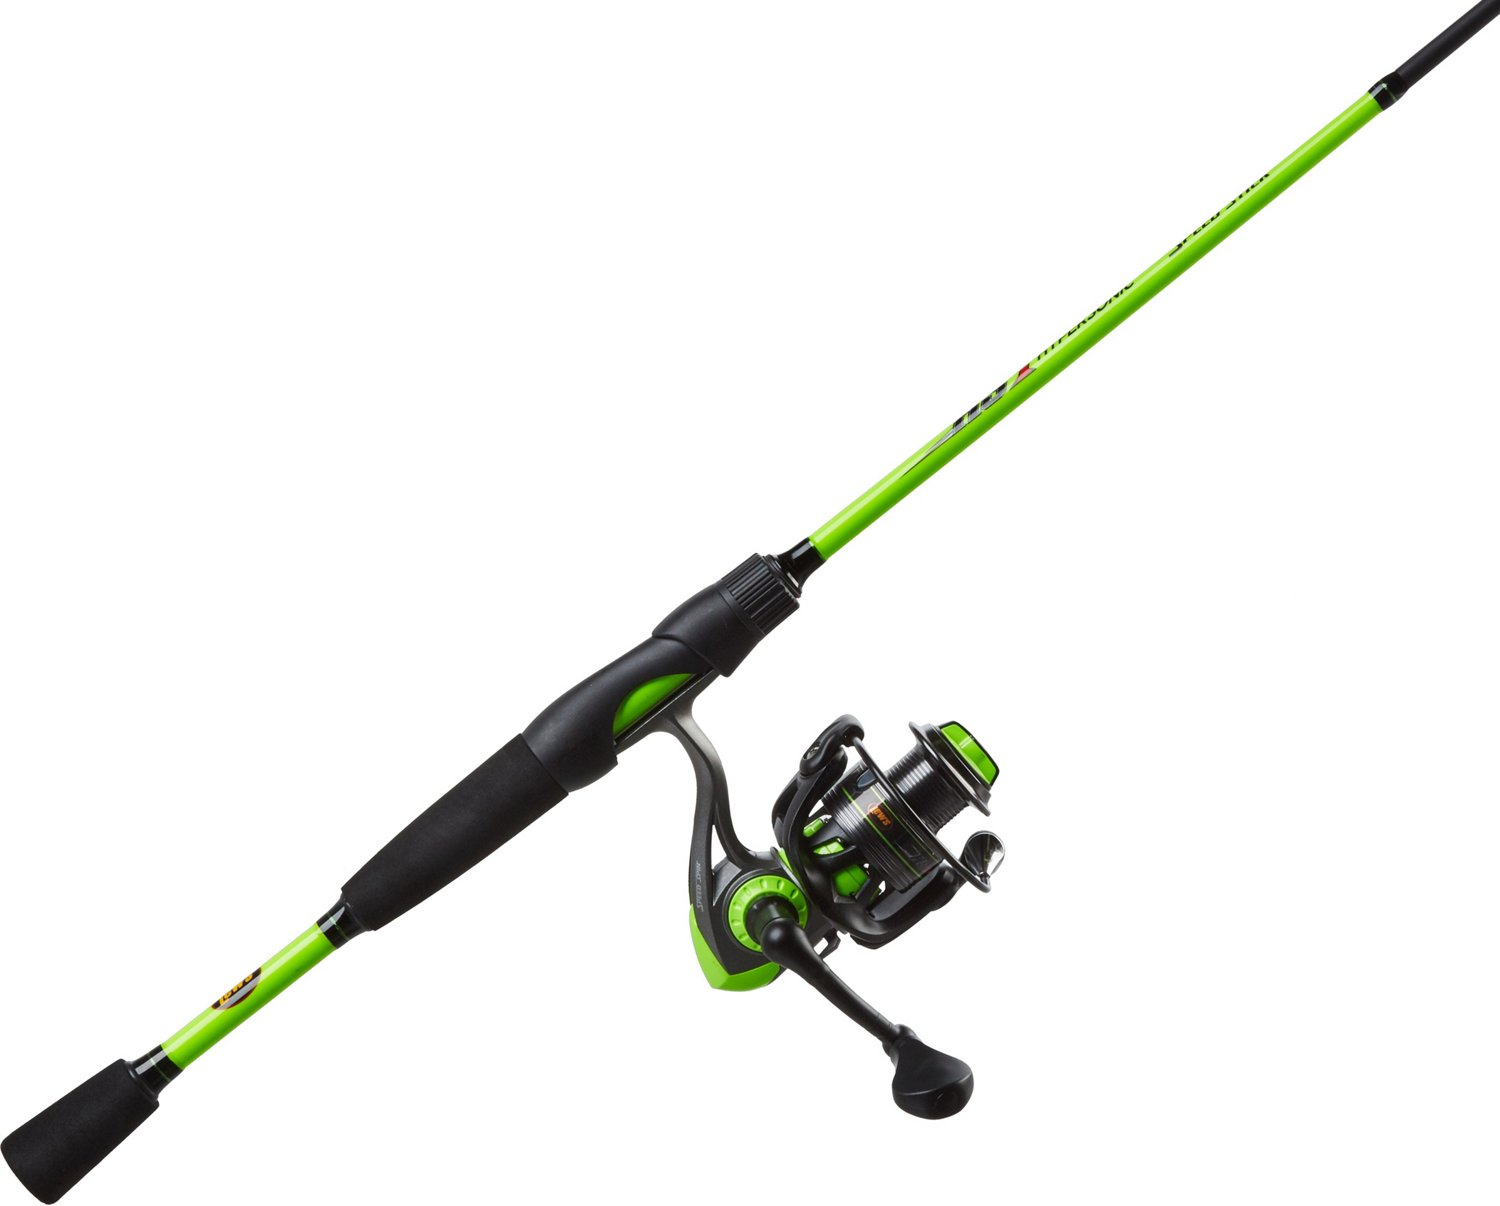 Lew's Hypersonic 20 Speed Spin 6 ft Lite Spinning Reel and Rod Combo